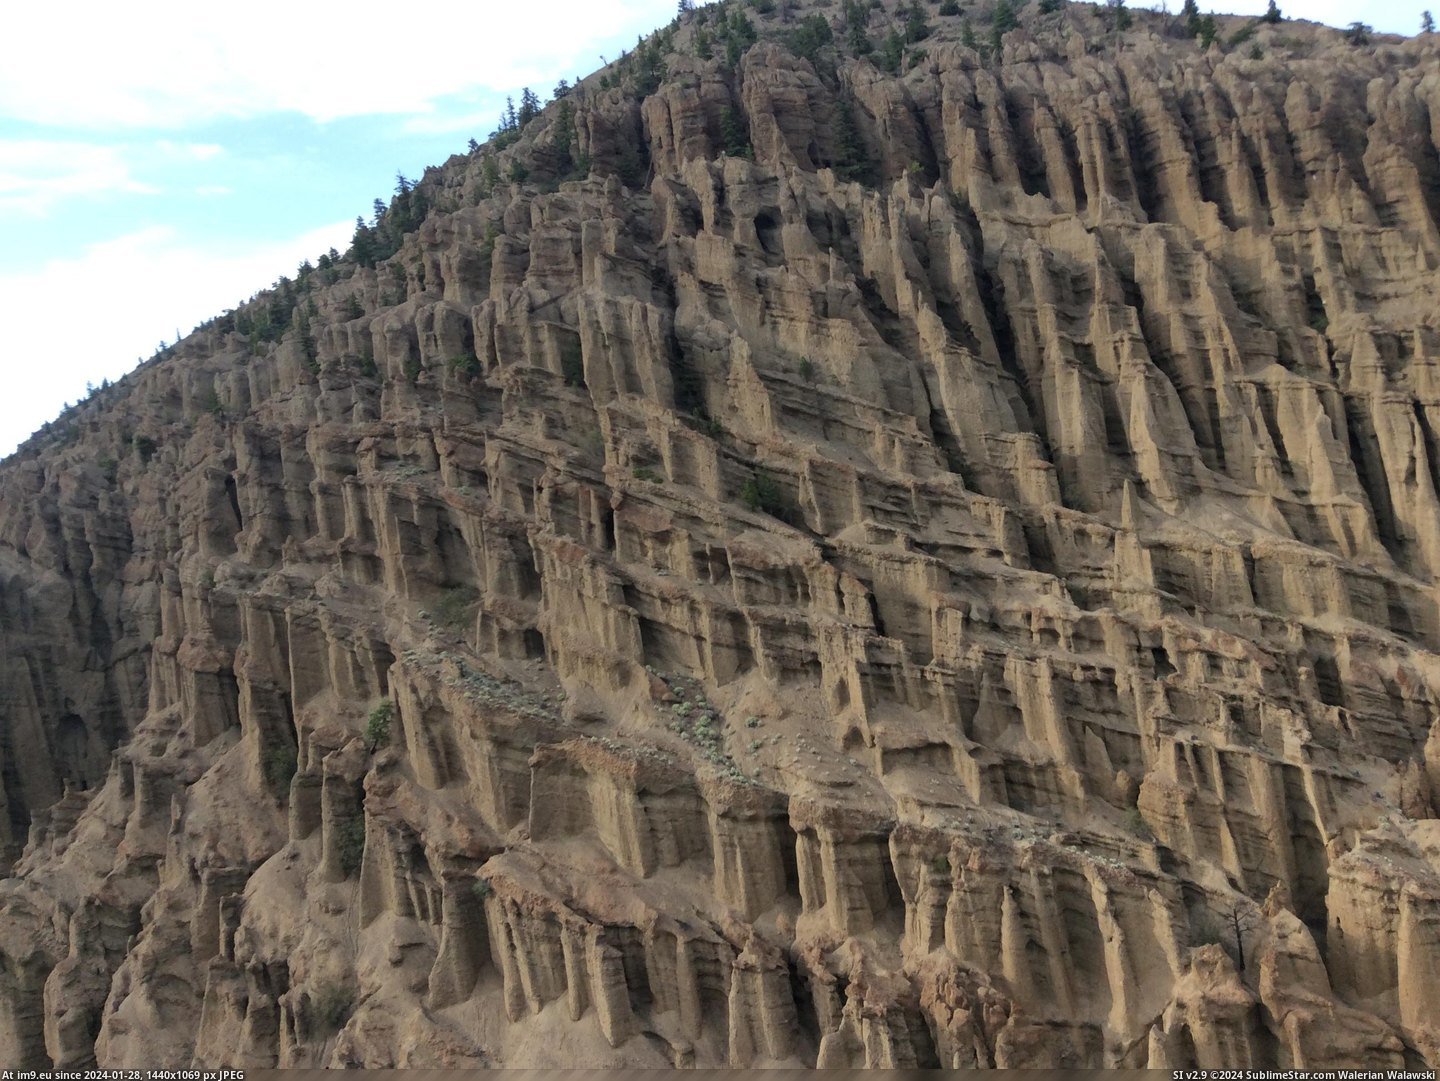 #Time #Water #River #Clinton #Fraser #Hoodoos #Canada #Wind #Effects [Earthporn] The effects of wind, water, and time. Hoodoos along the Fraser River, near Clinton BC, Canada. [2,592 x 1936][OC] Pic. (Изображение из альбом My r/EARTHPORN favs))